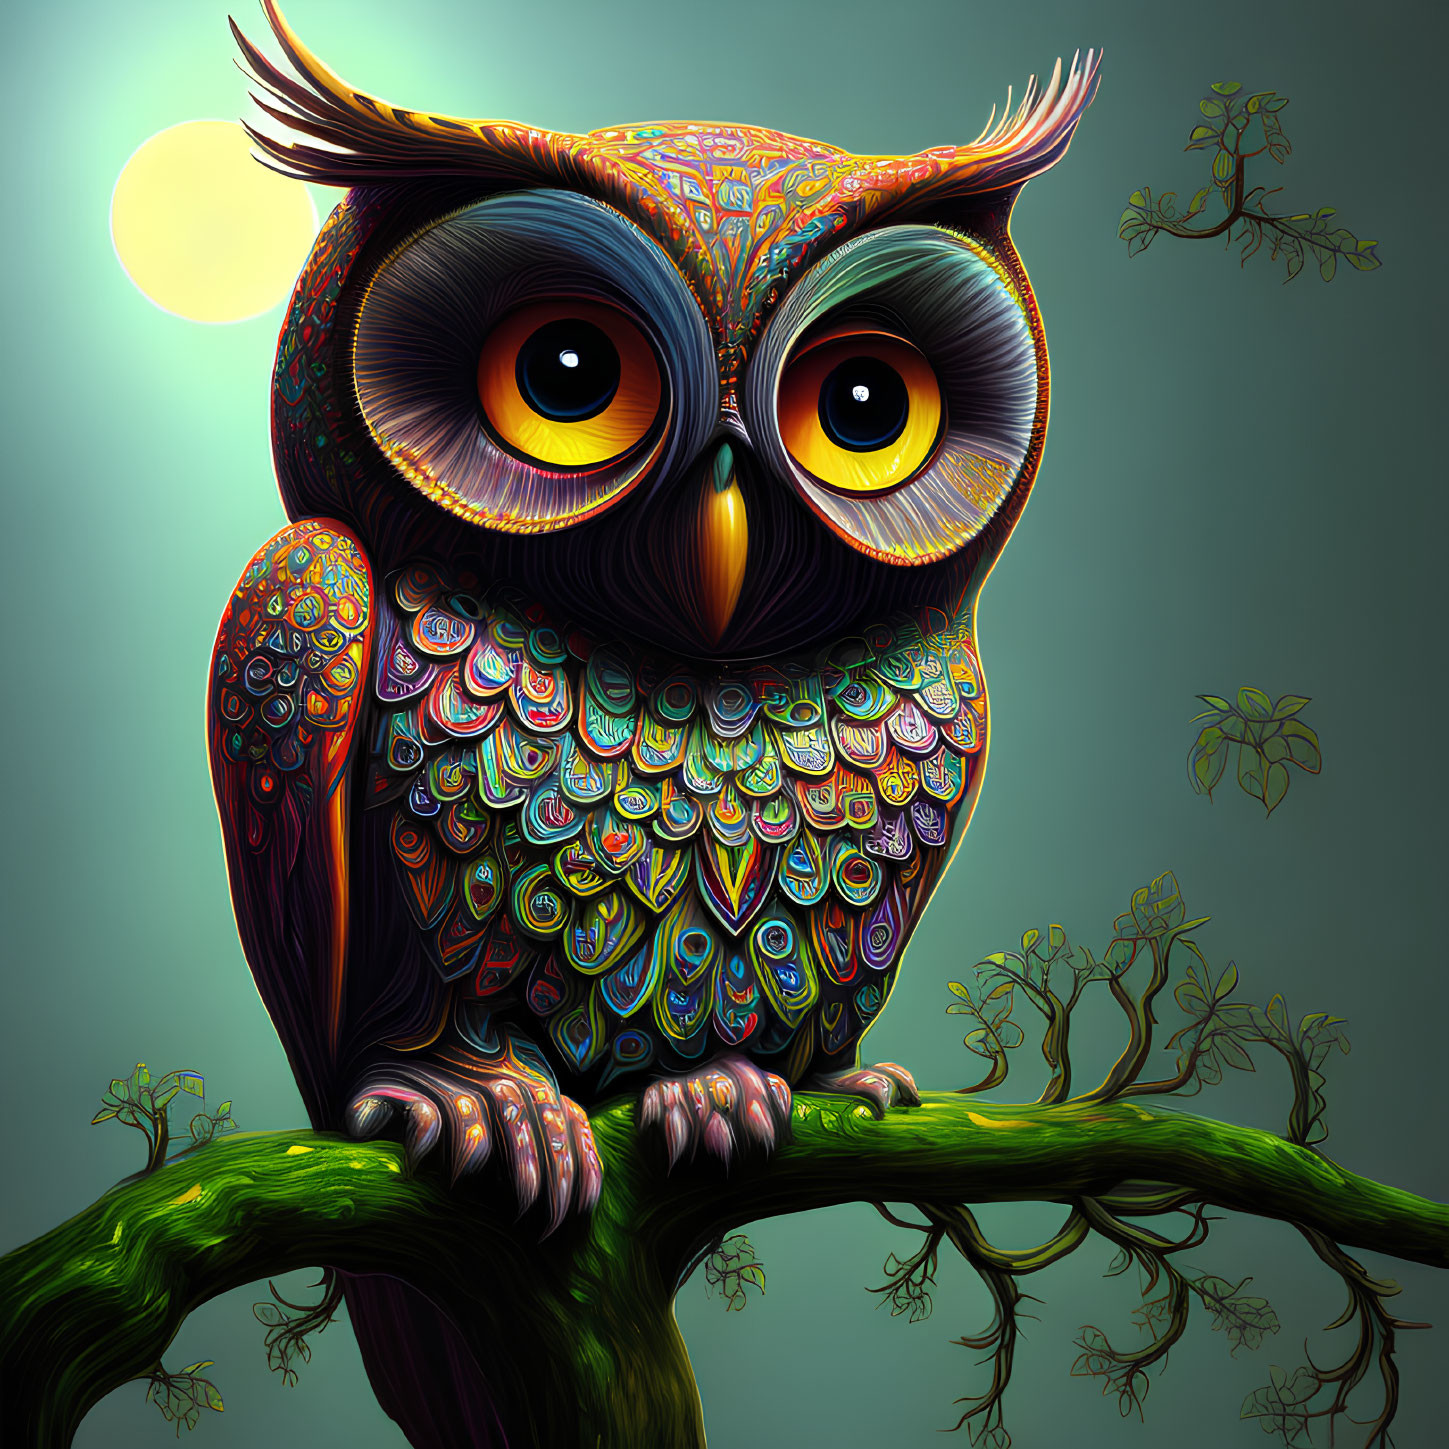 Colorful Stylized Owl Illustration with Expressive Eyes on Green Branch